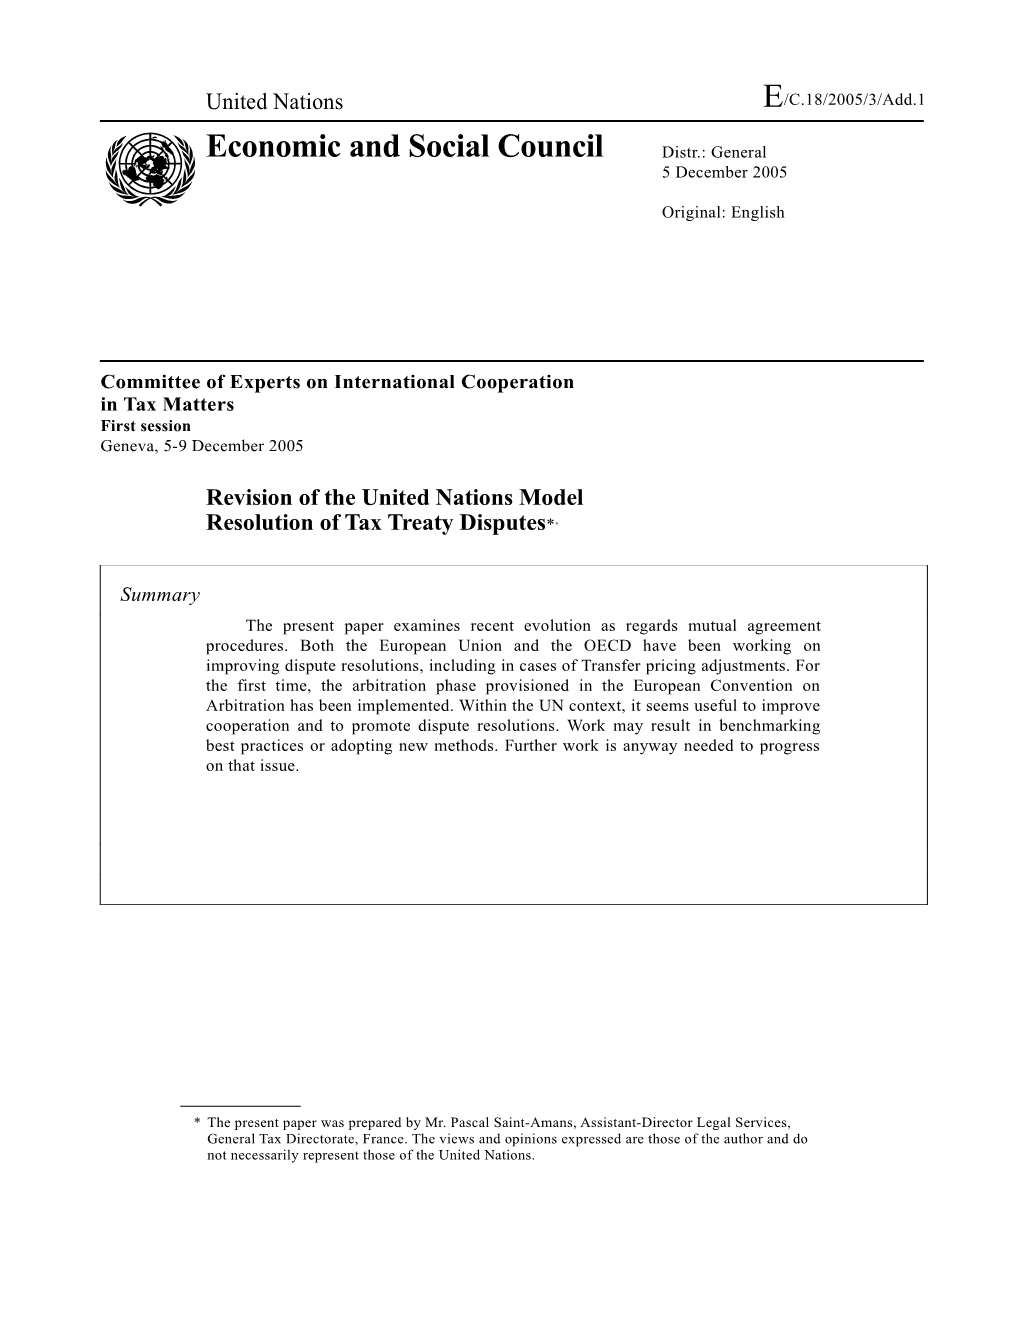 Revision of the United Nations Model